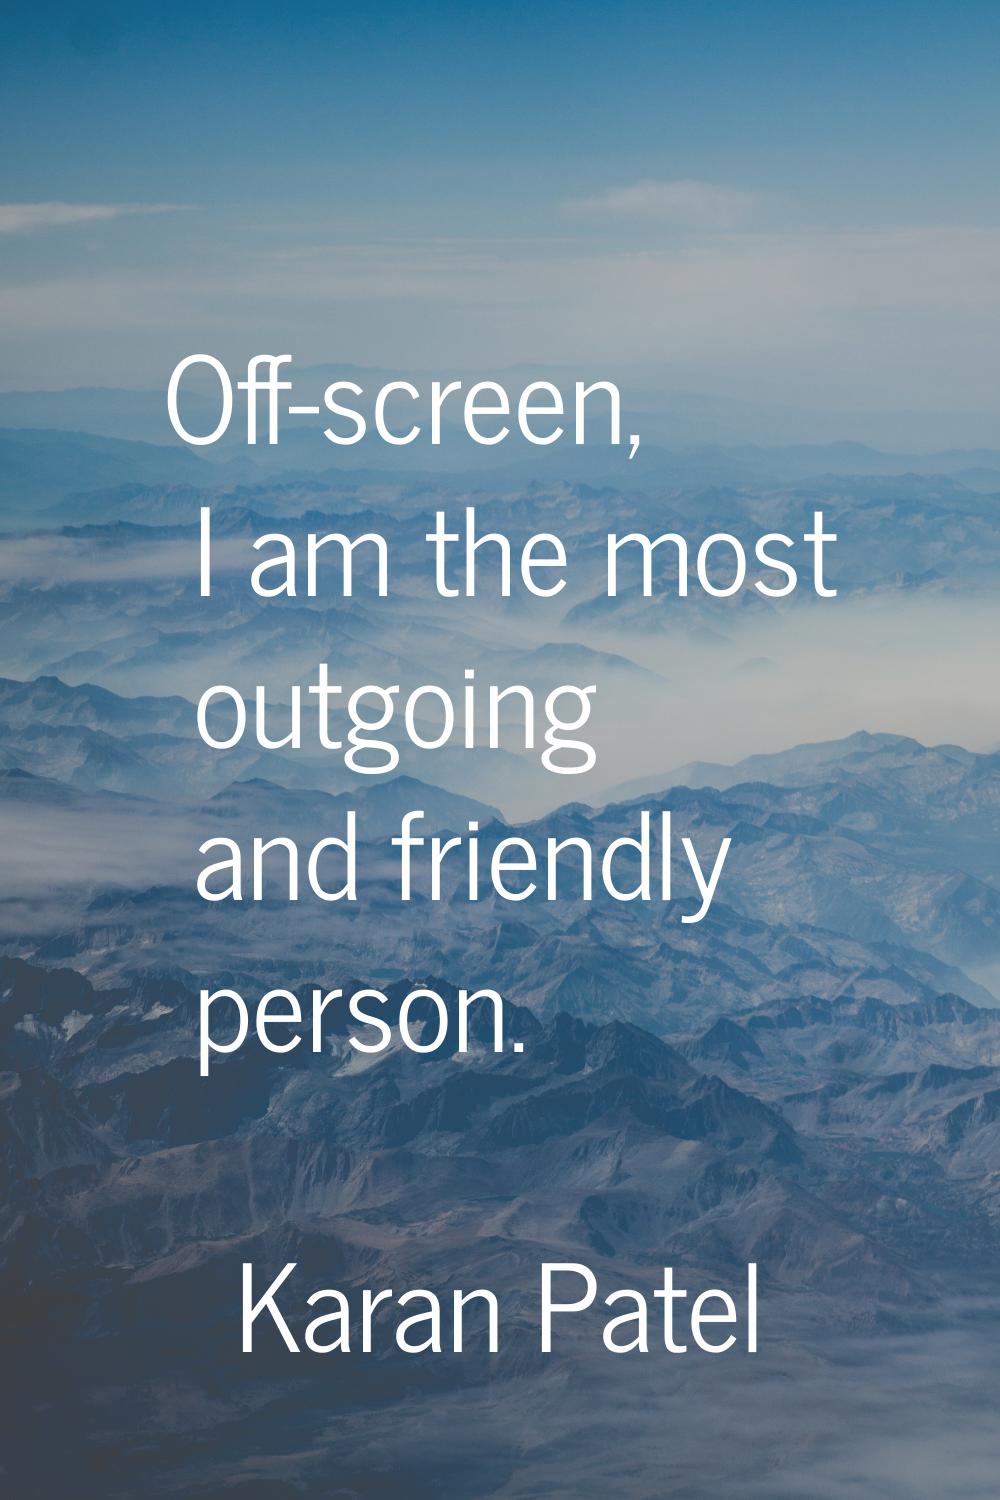 Off-screen, I am the most outgoing and friendly person.